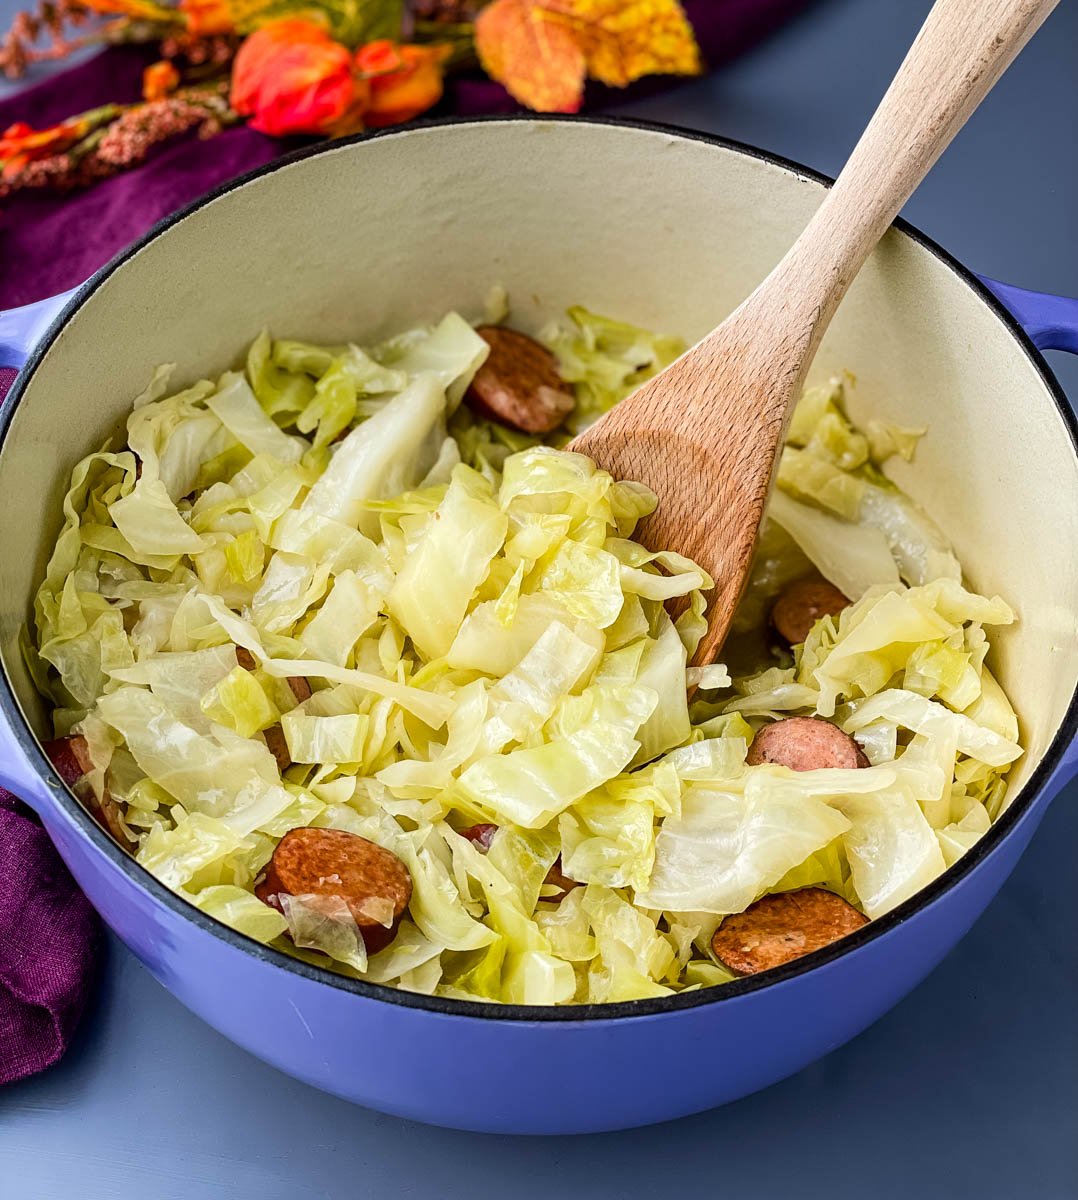 How to cook cabbage